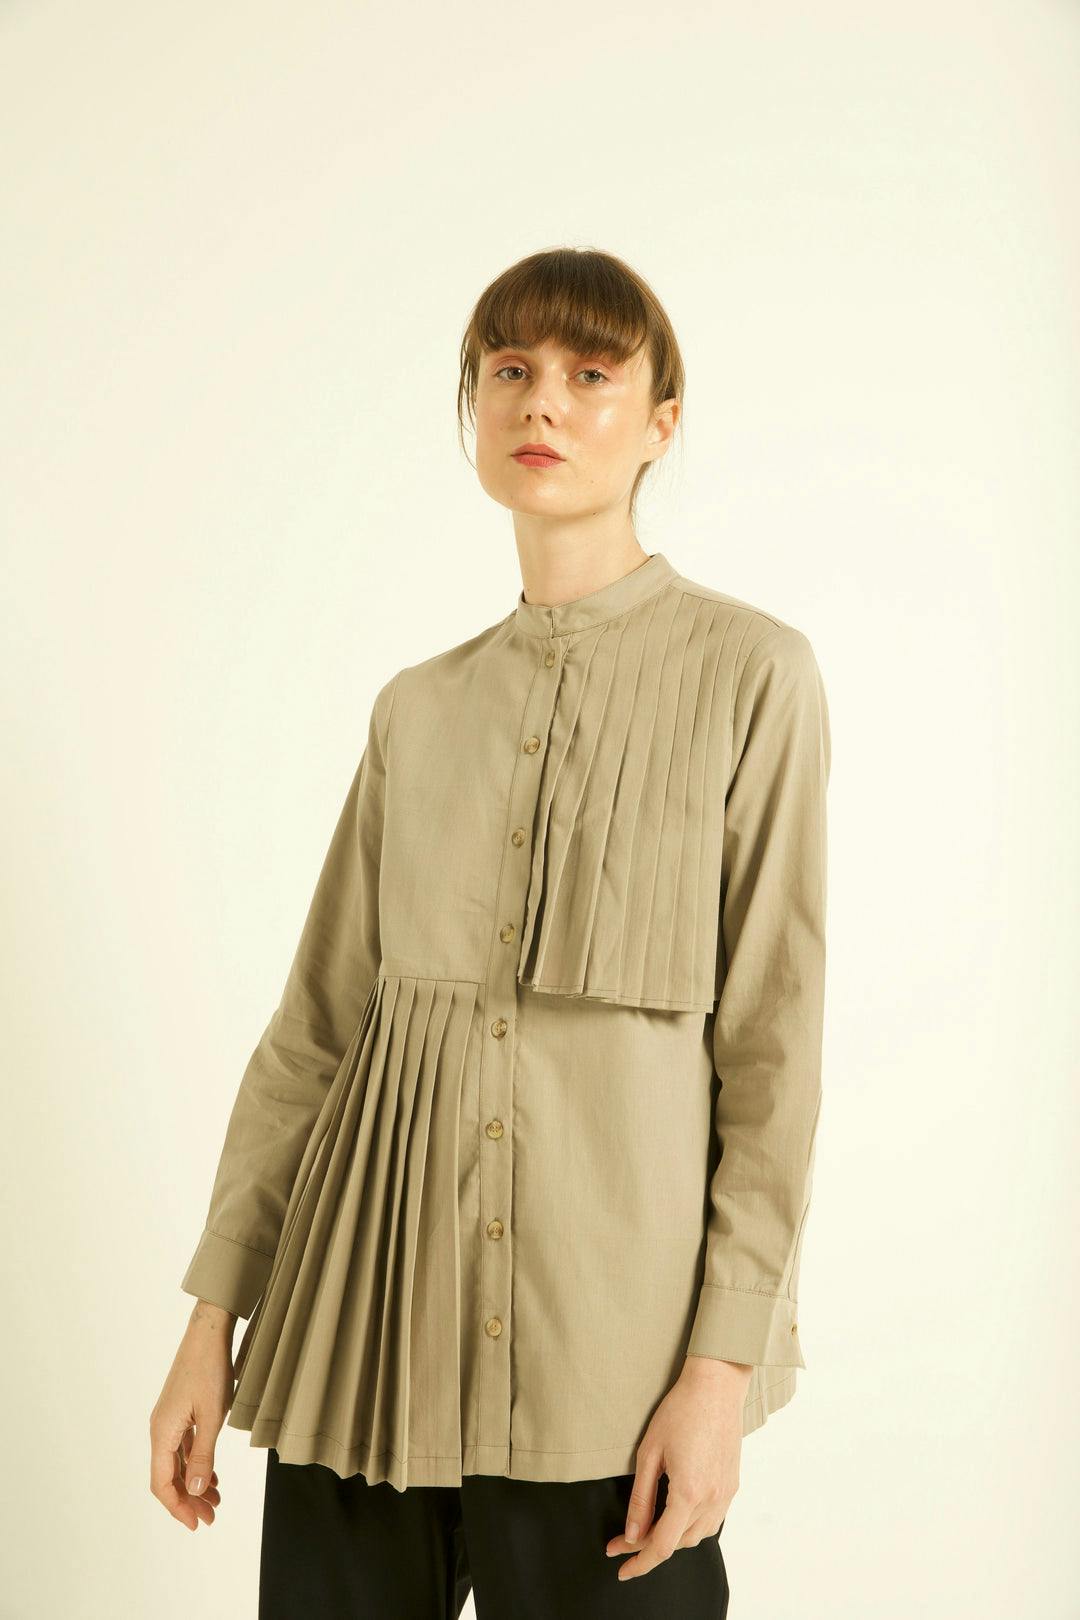 Accordion Pleat Shirt, a product by Dash & Dot